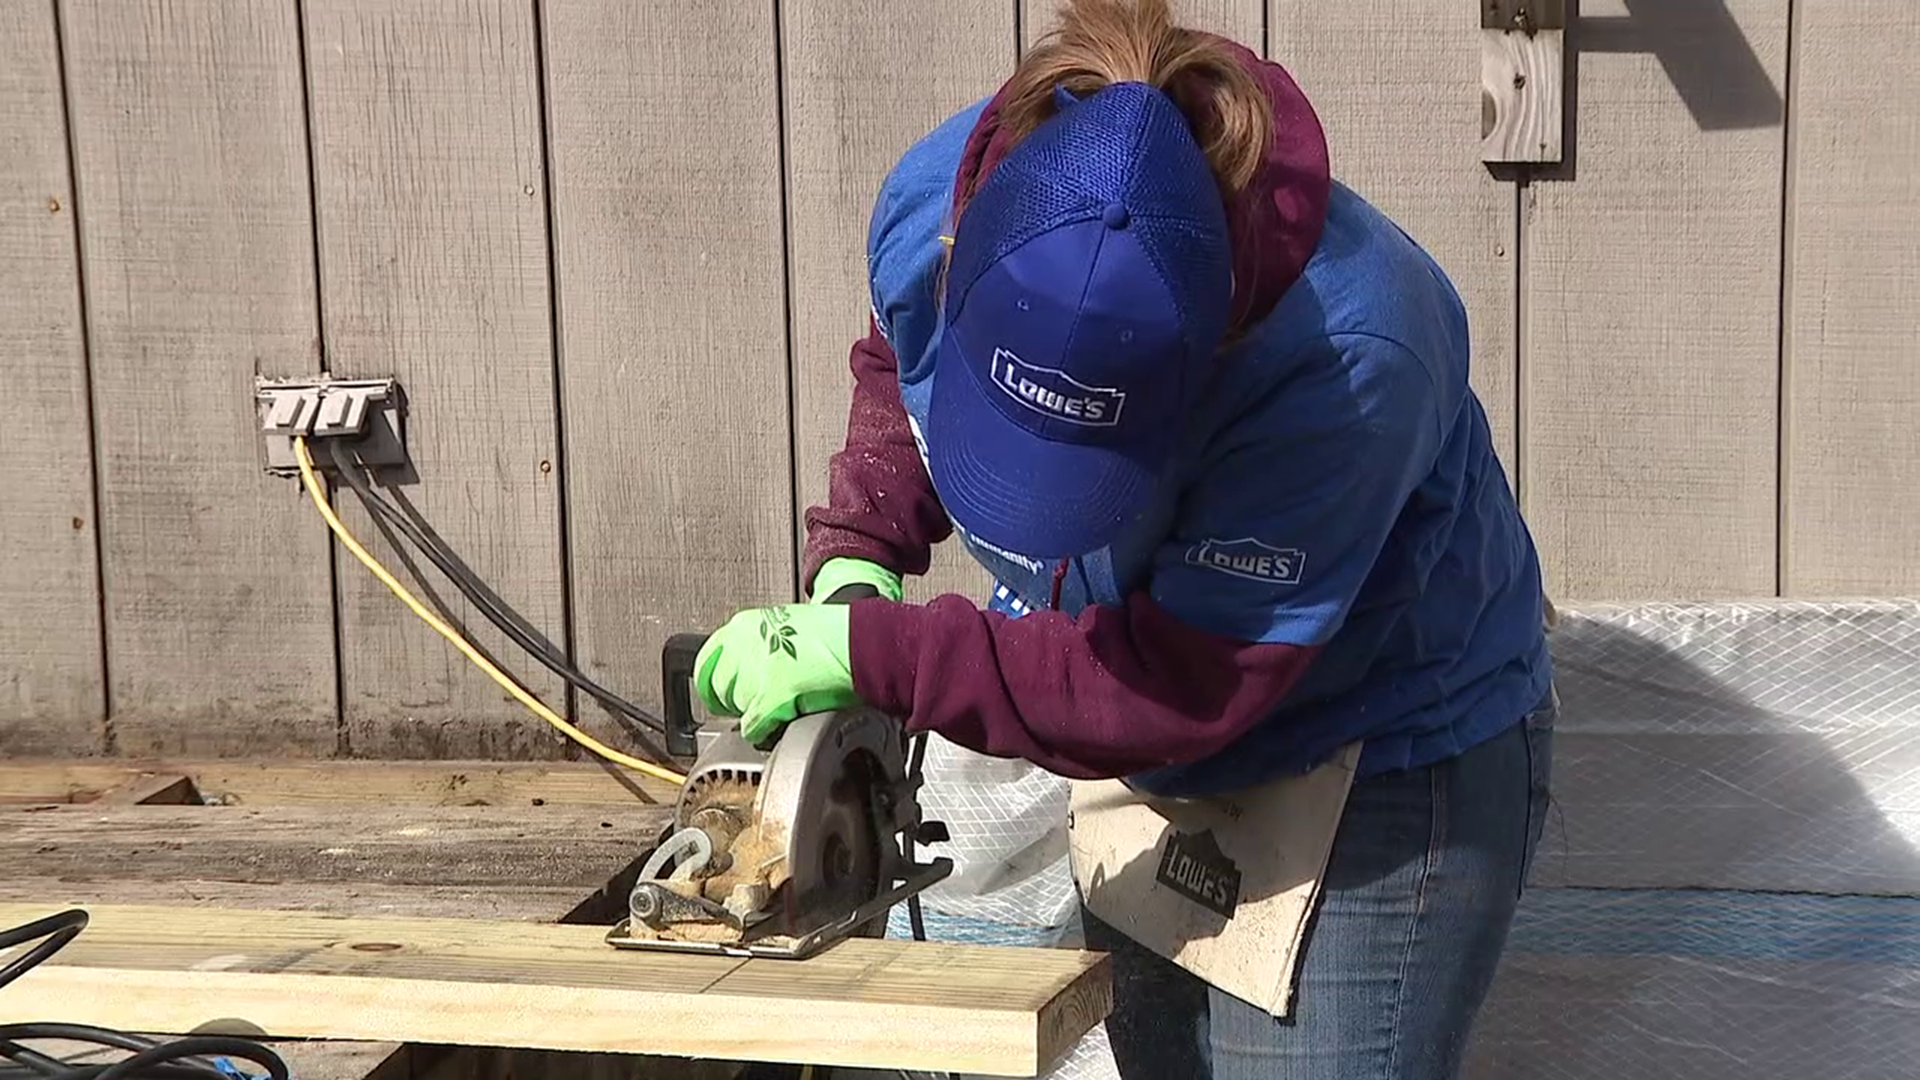 A group of women worked together to build a new handicap-accessible ramp for a homeowner in the Poconos.